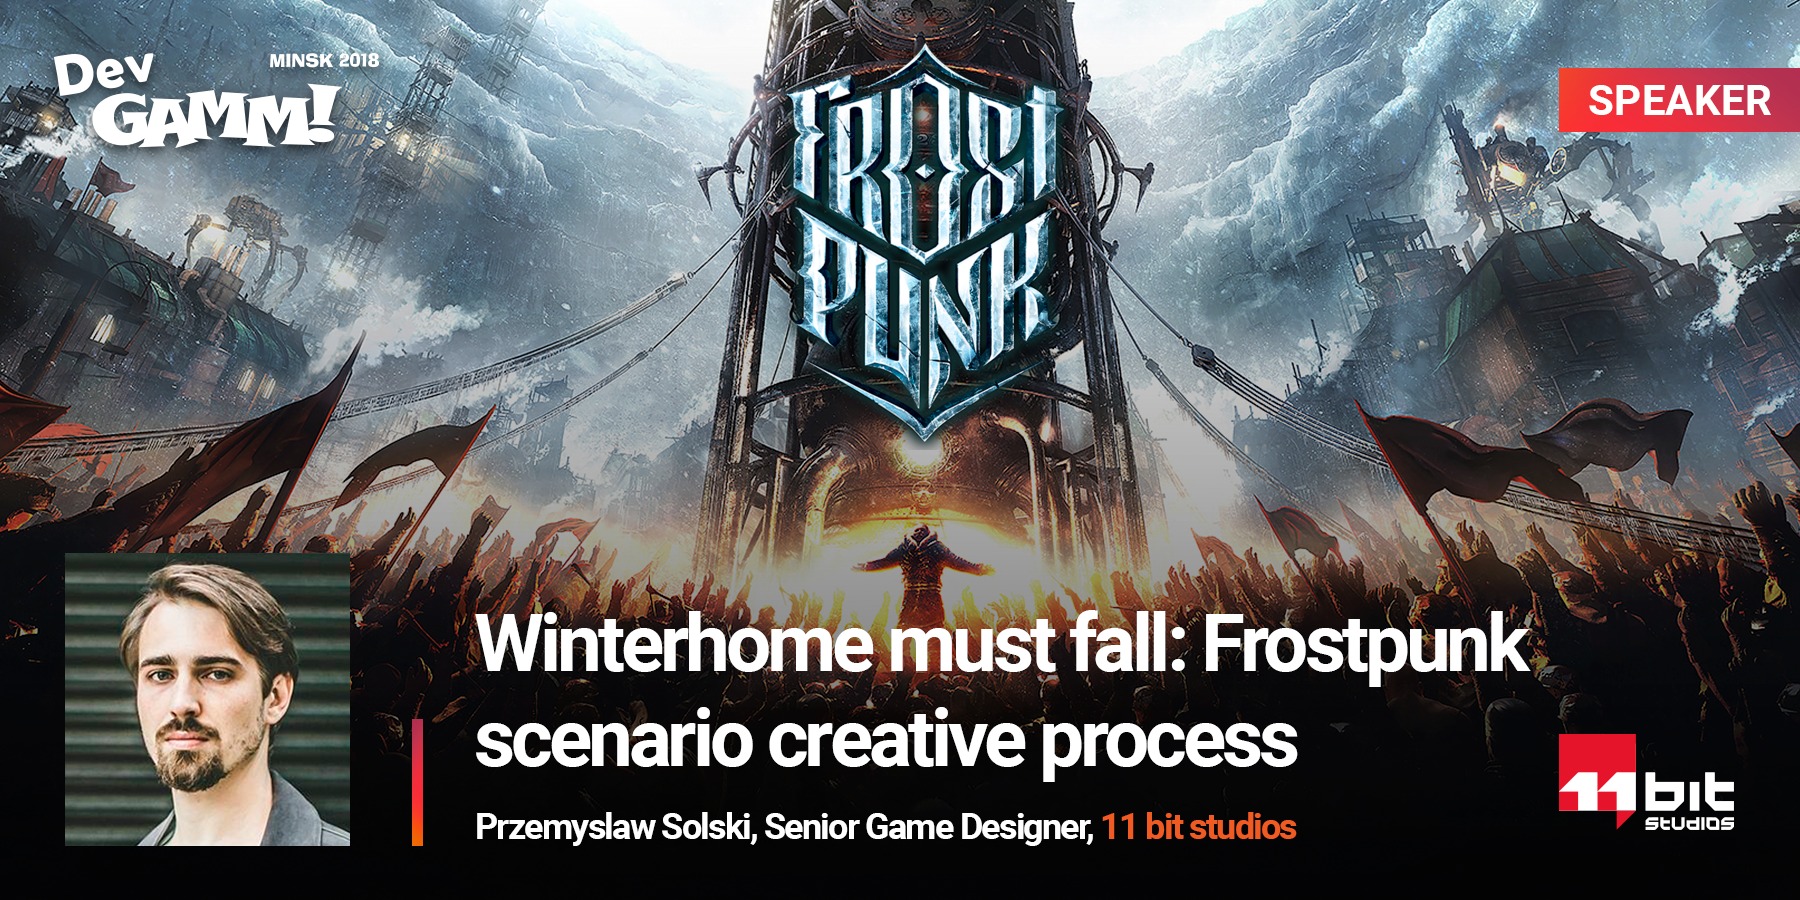 You are currently viewing Przemyslaw Solski about Frostpunk scenario creative process